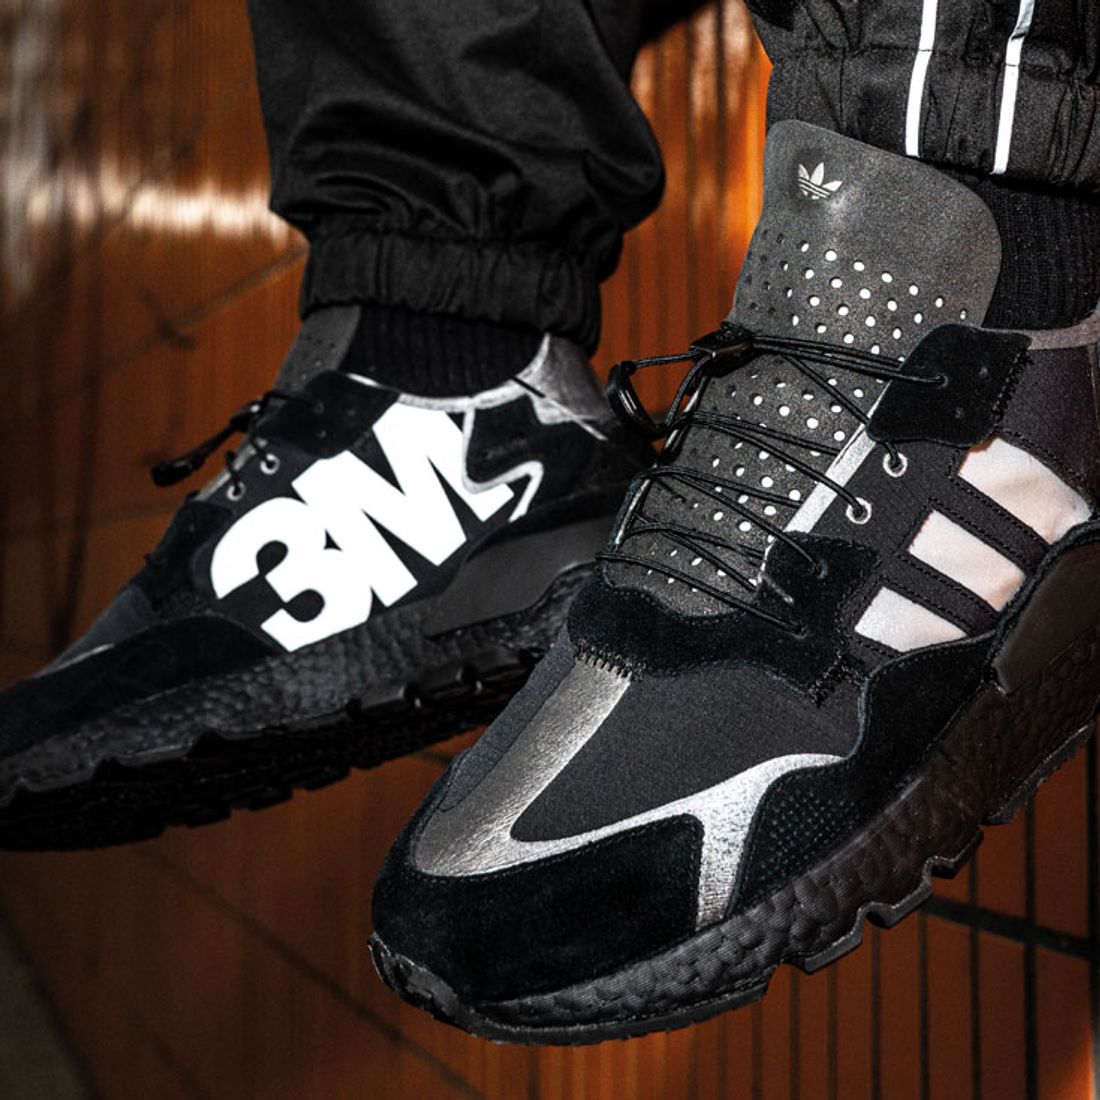 Reflecting adidas and 3M's Nite Jogger Heritage - Sneaker